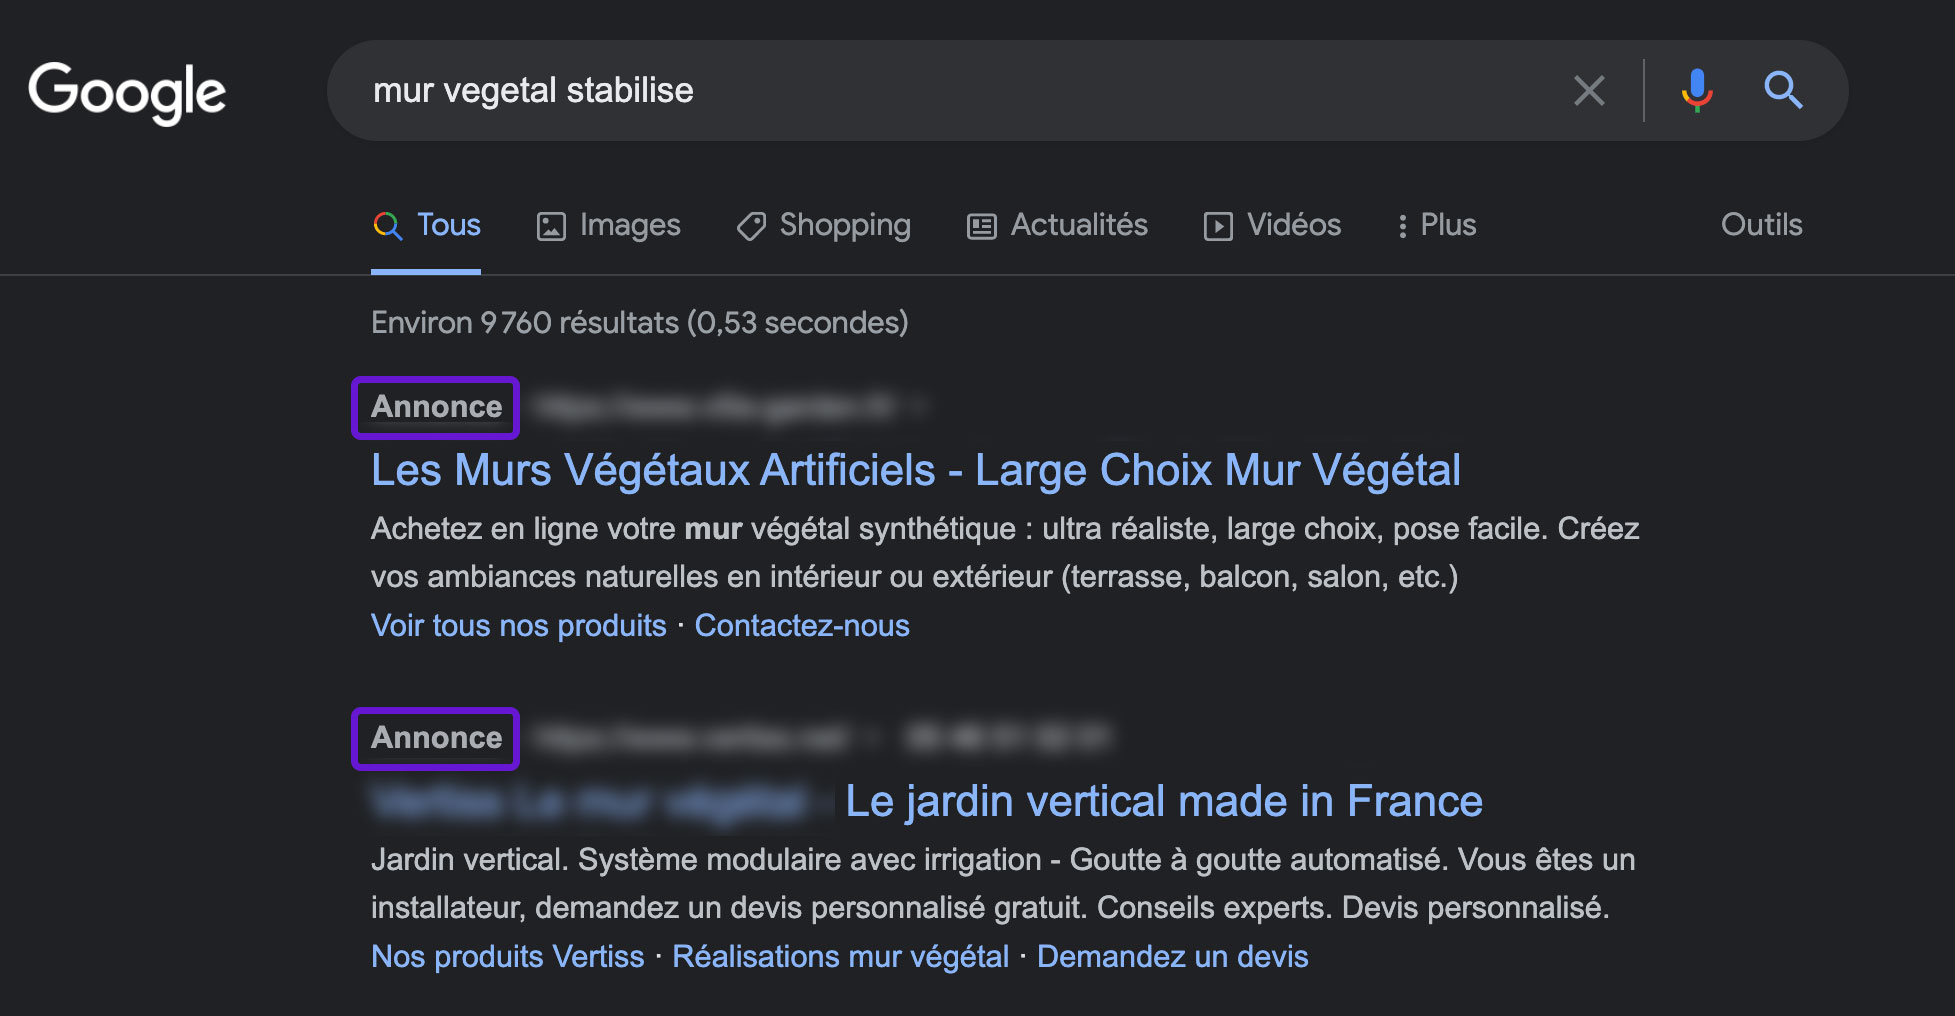 referencement payant sea google ads vegetal stabilise